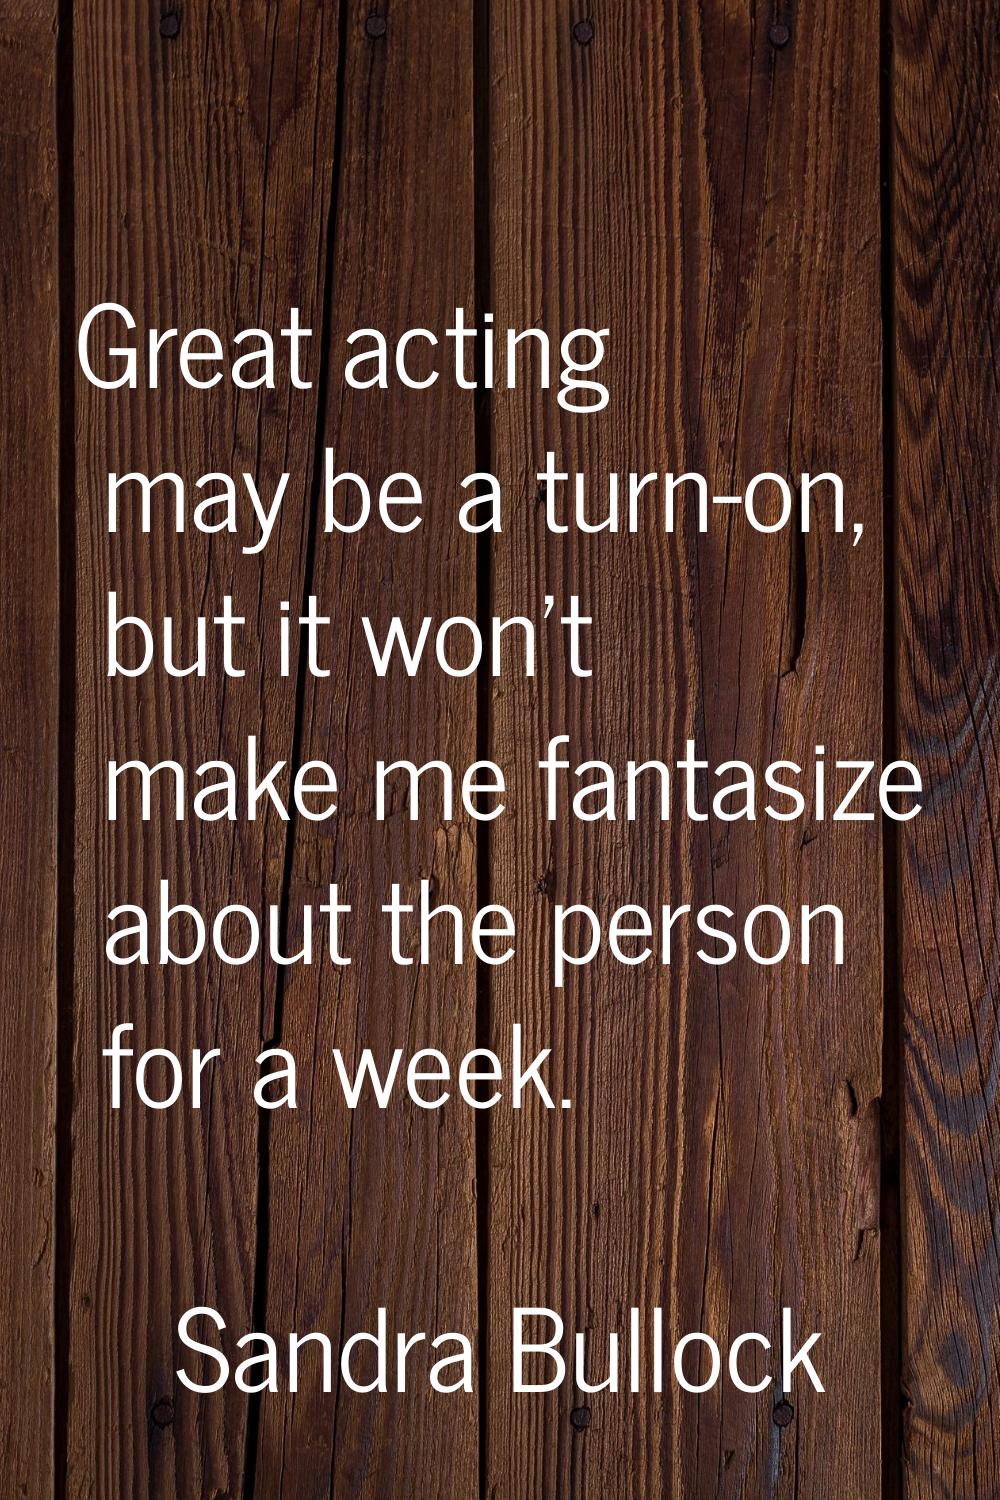 Great acting may be a turn-on, but it won't make me fantasize about the person for a week.